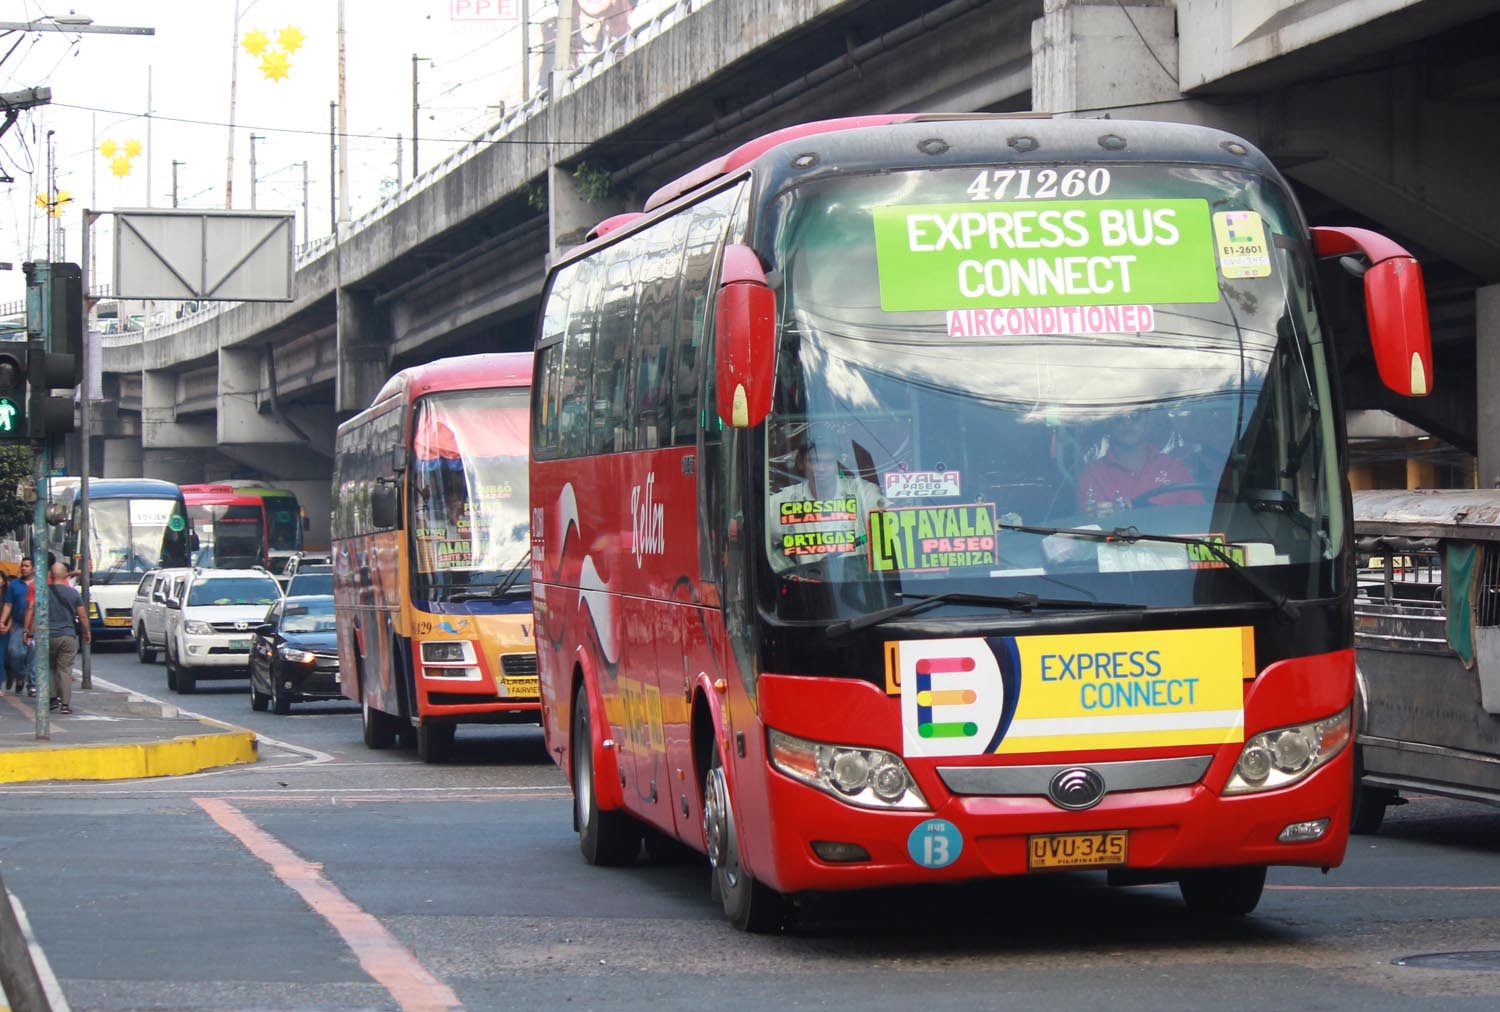 Express bus service for holiday season starts December 5